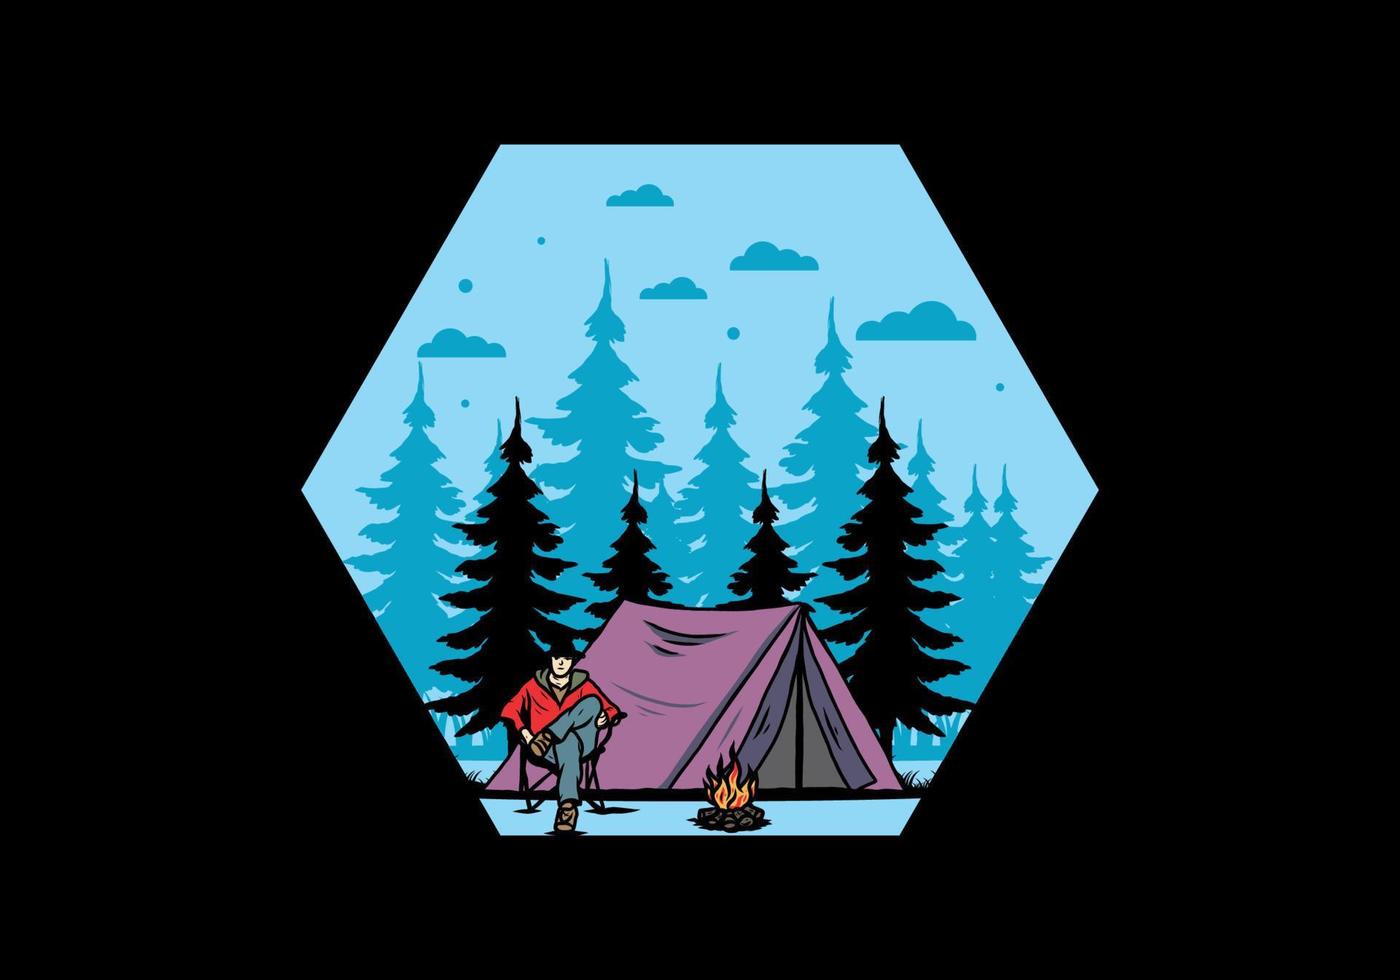 Relax in front of the tent illustration vector